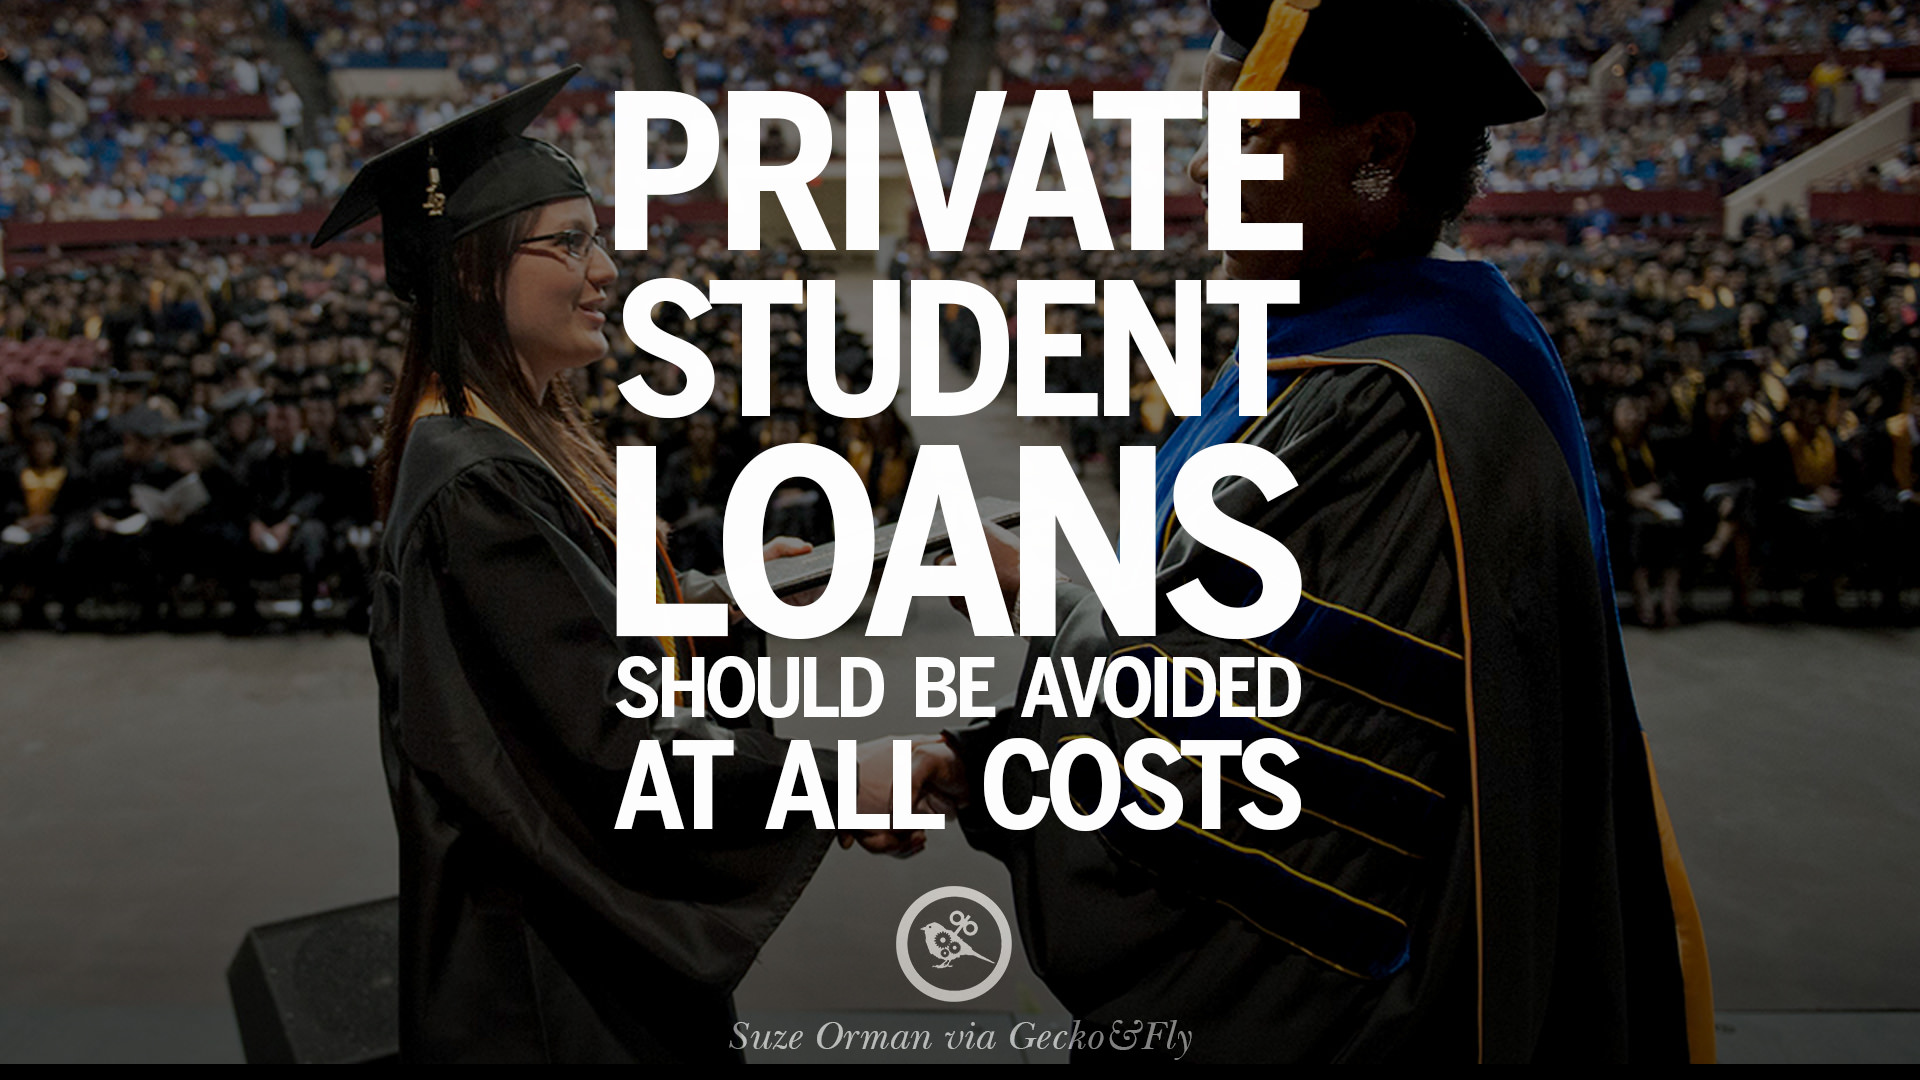 Teaching Programs That Pay Student Loans